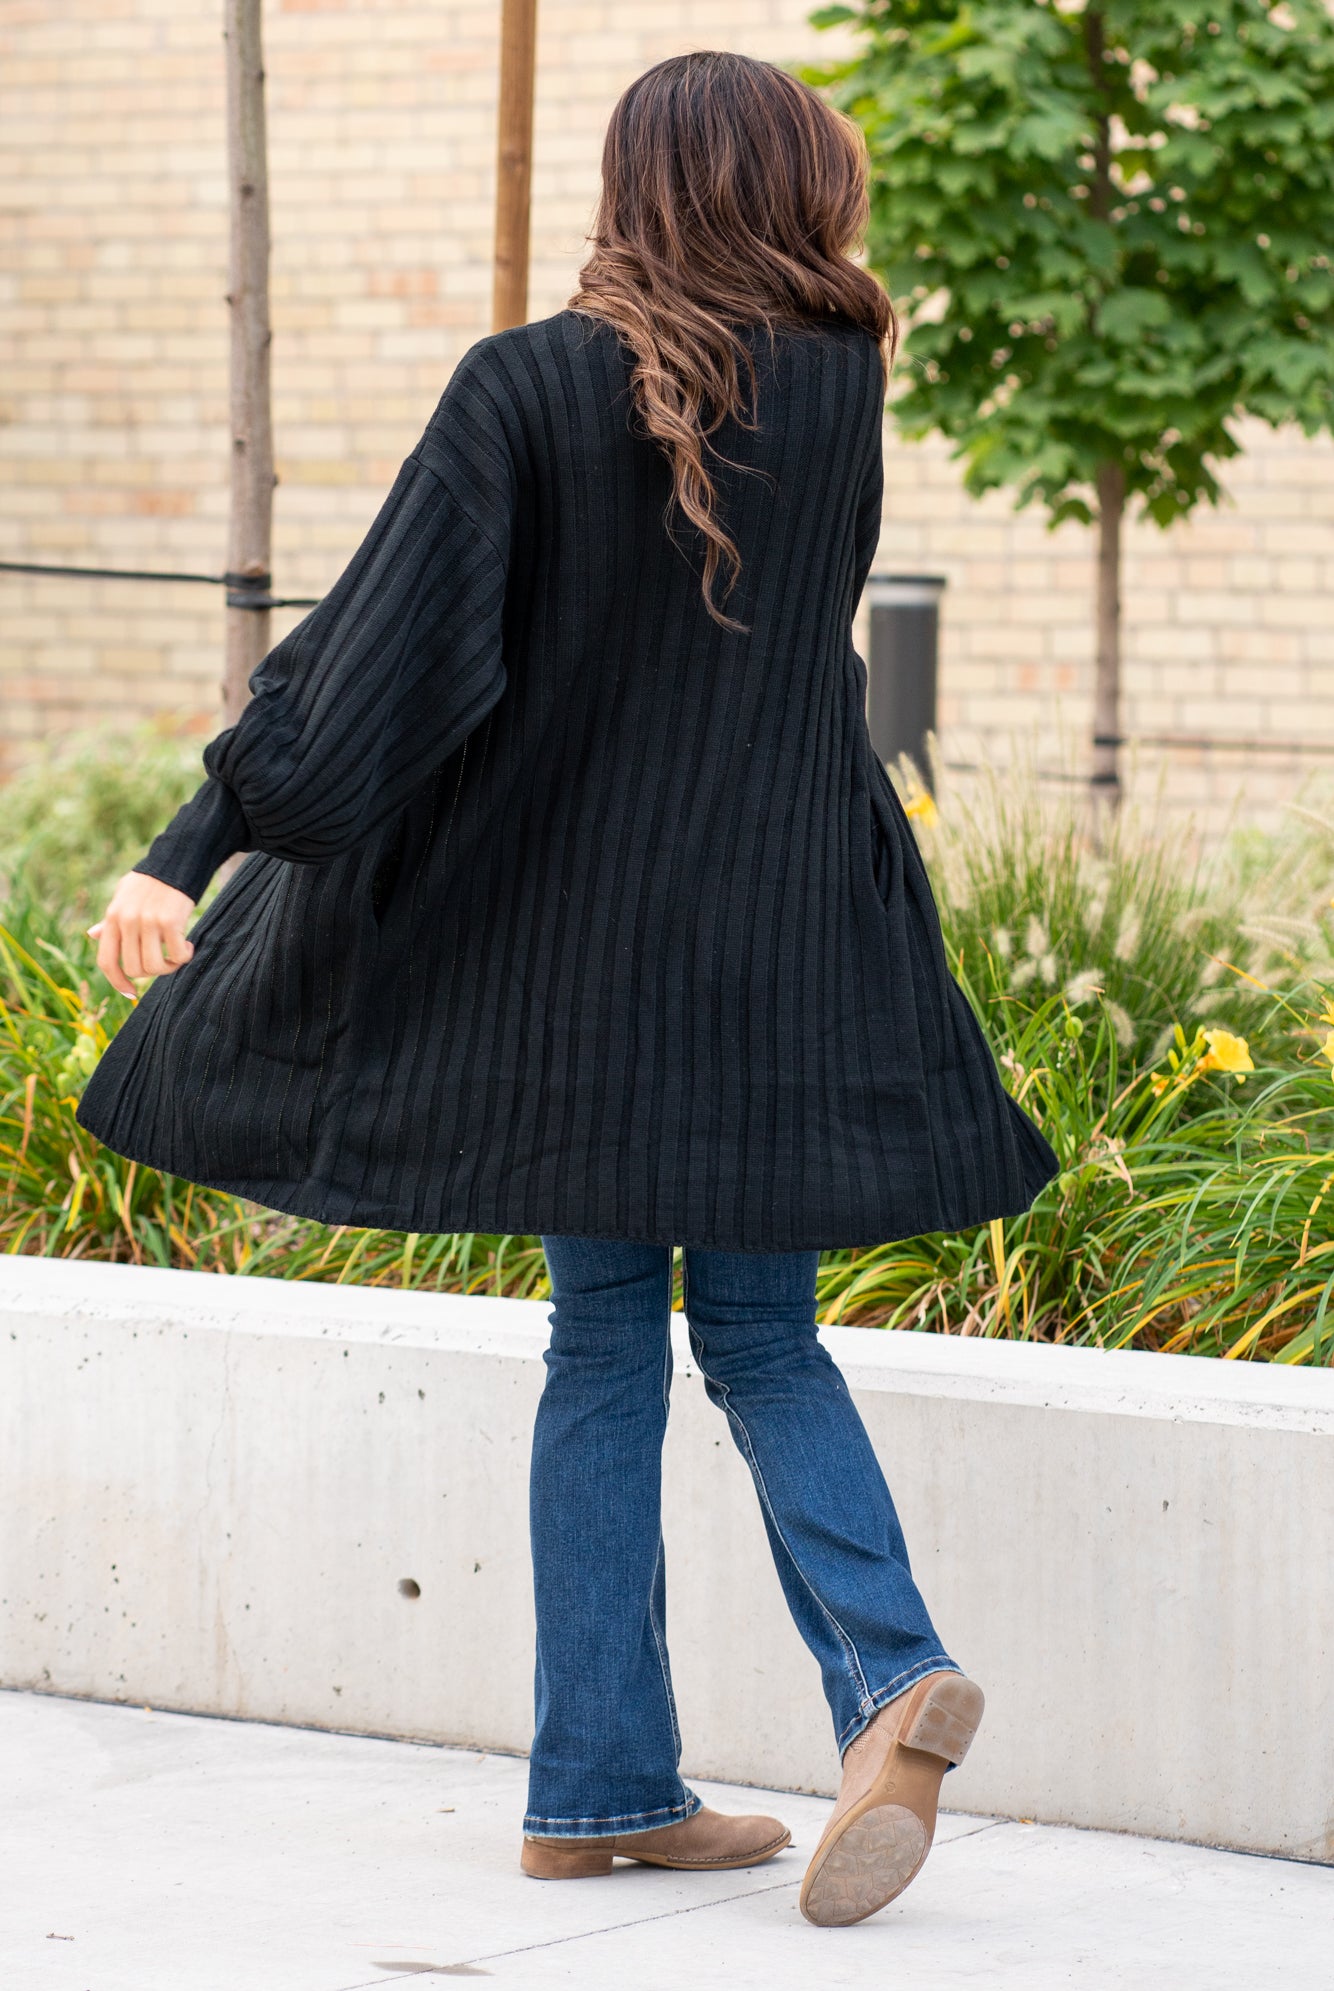 Blue Buttercup  Pair your favorite cami and jeans with this cute open front cardigan.    Color: Black  Neckline: Open  Sleeve: Long  Style #: SW60013 Contact us for any additional measurements or sizing.     